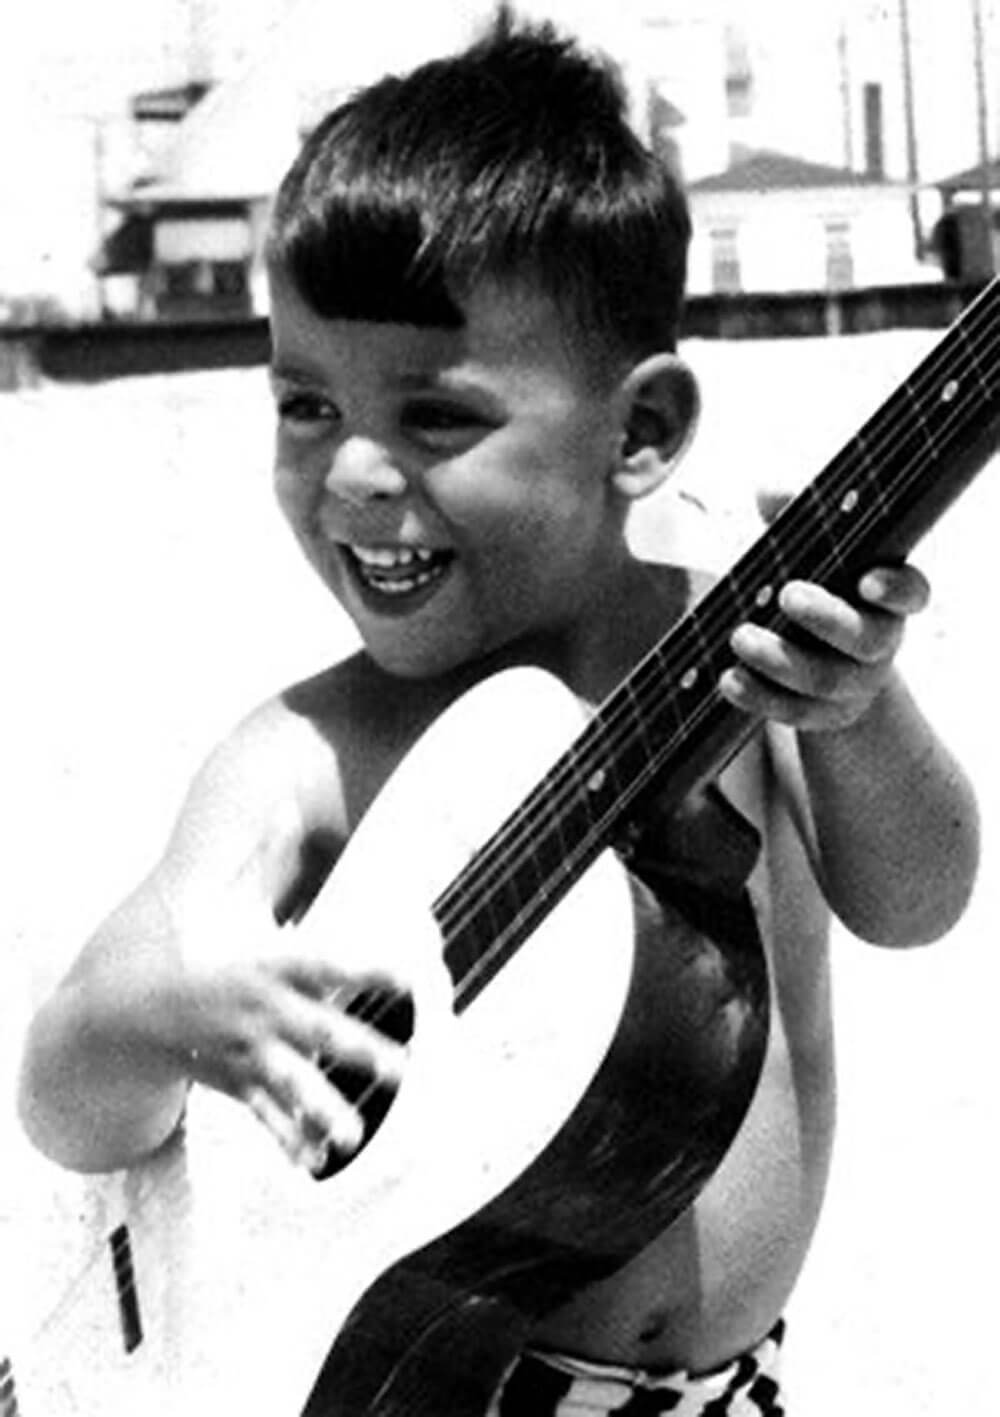 Howard Paul as a child holding a guitar